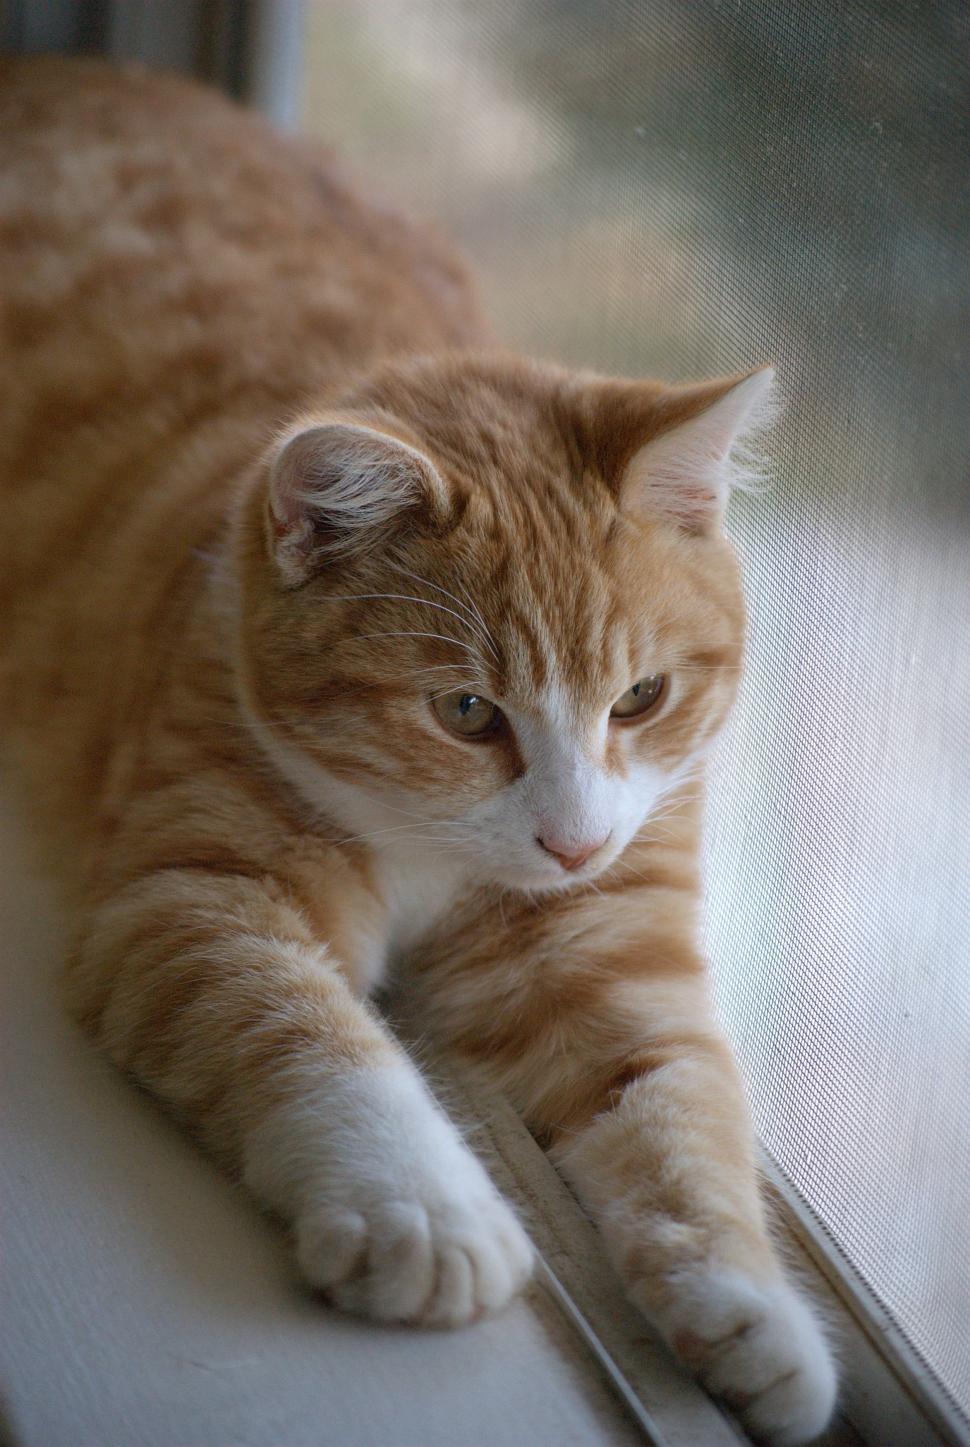 Free Image of Domestic Cat and Window  